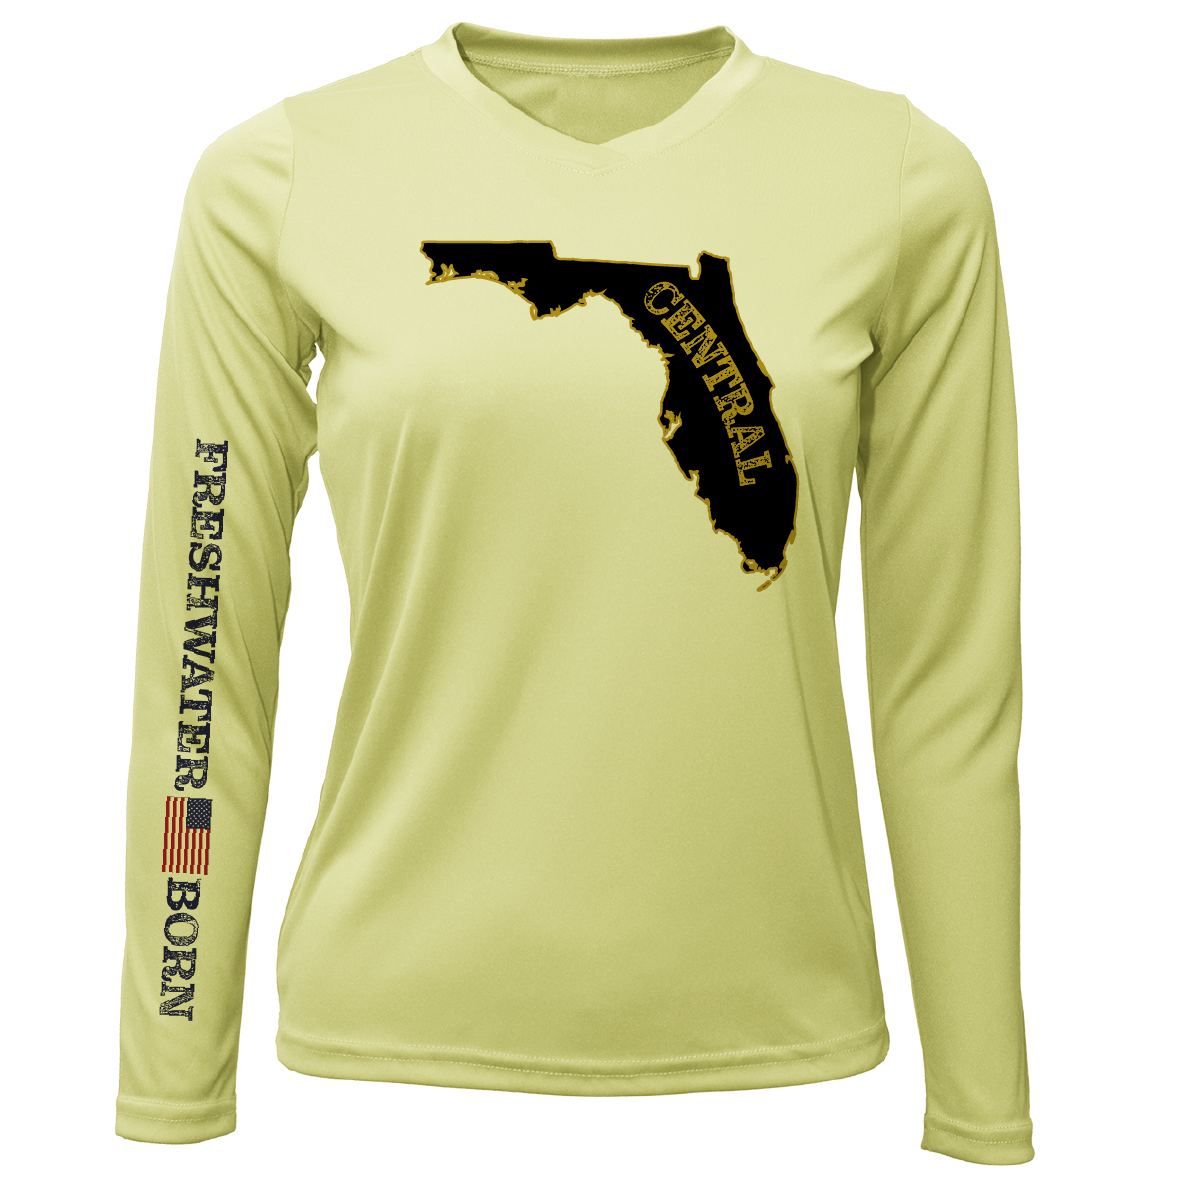 Black and Gold Freshwater Born Women's LS UPF 50+ Dry-Fit Shirt